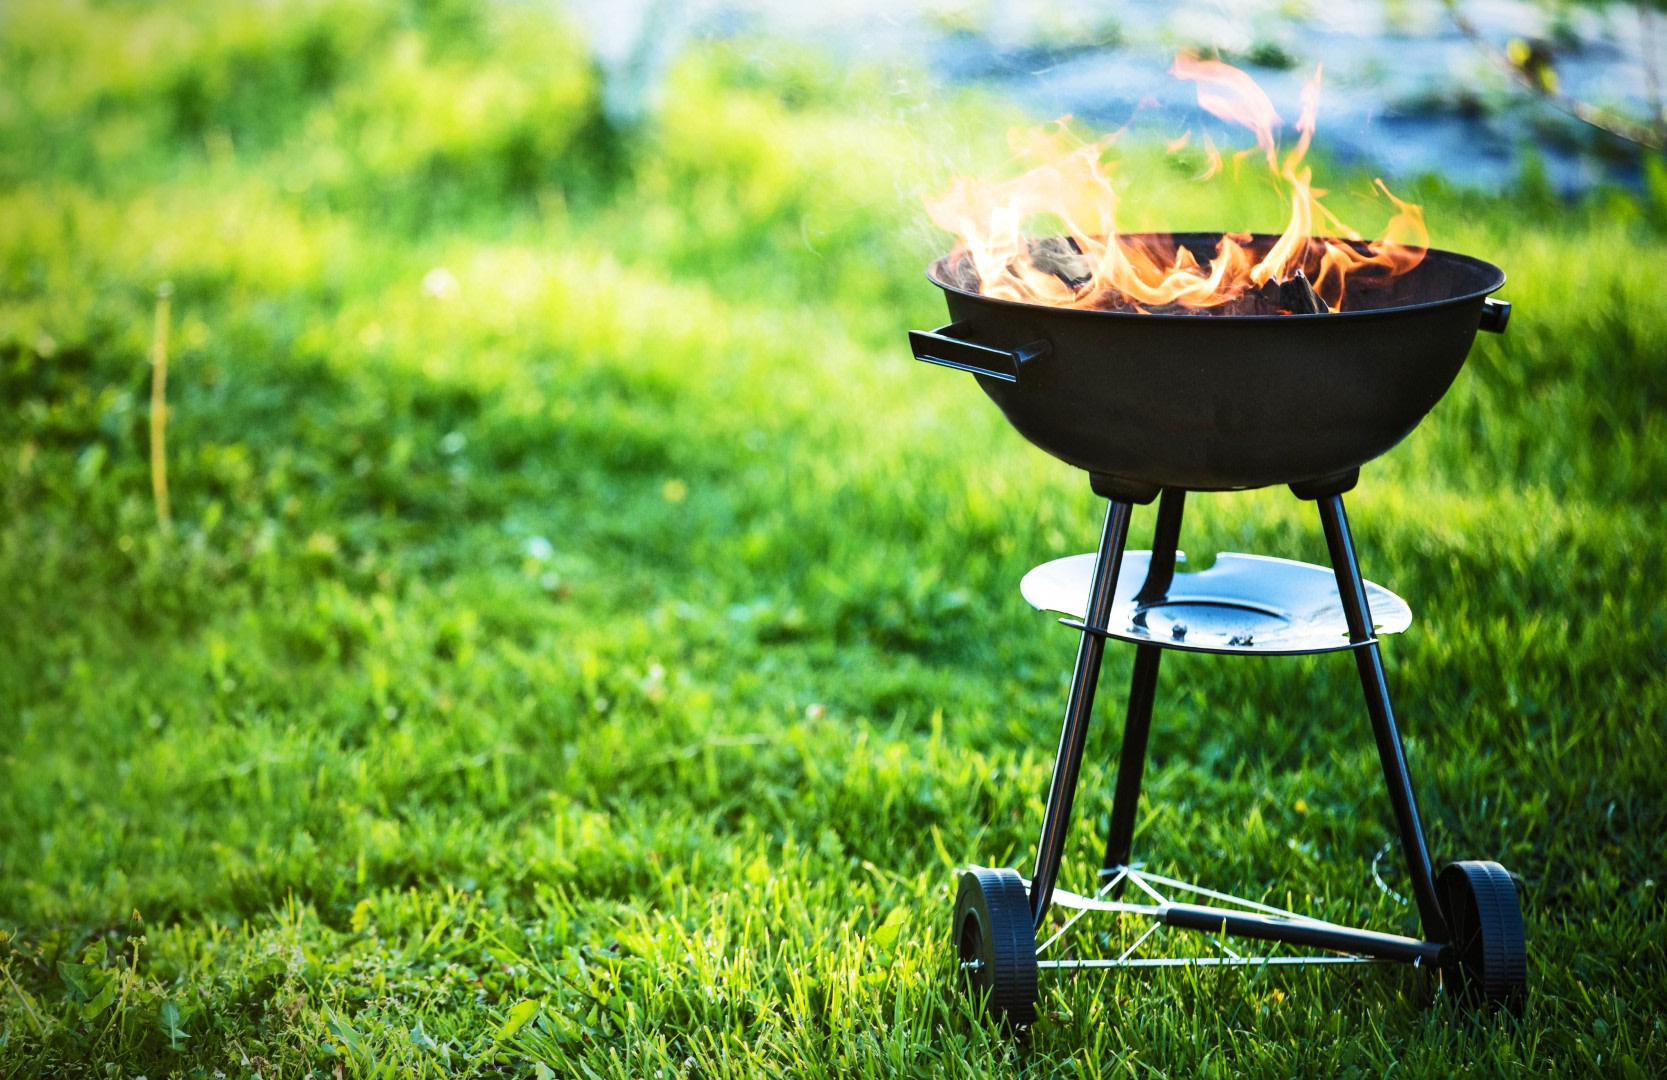 An image related to Best Portable Open Grills